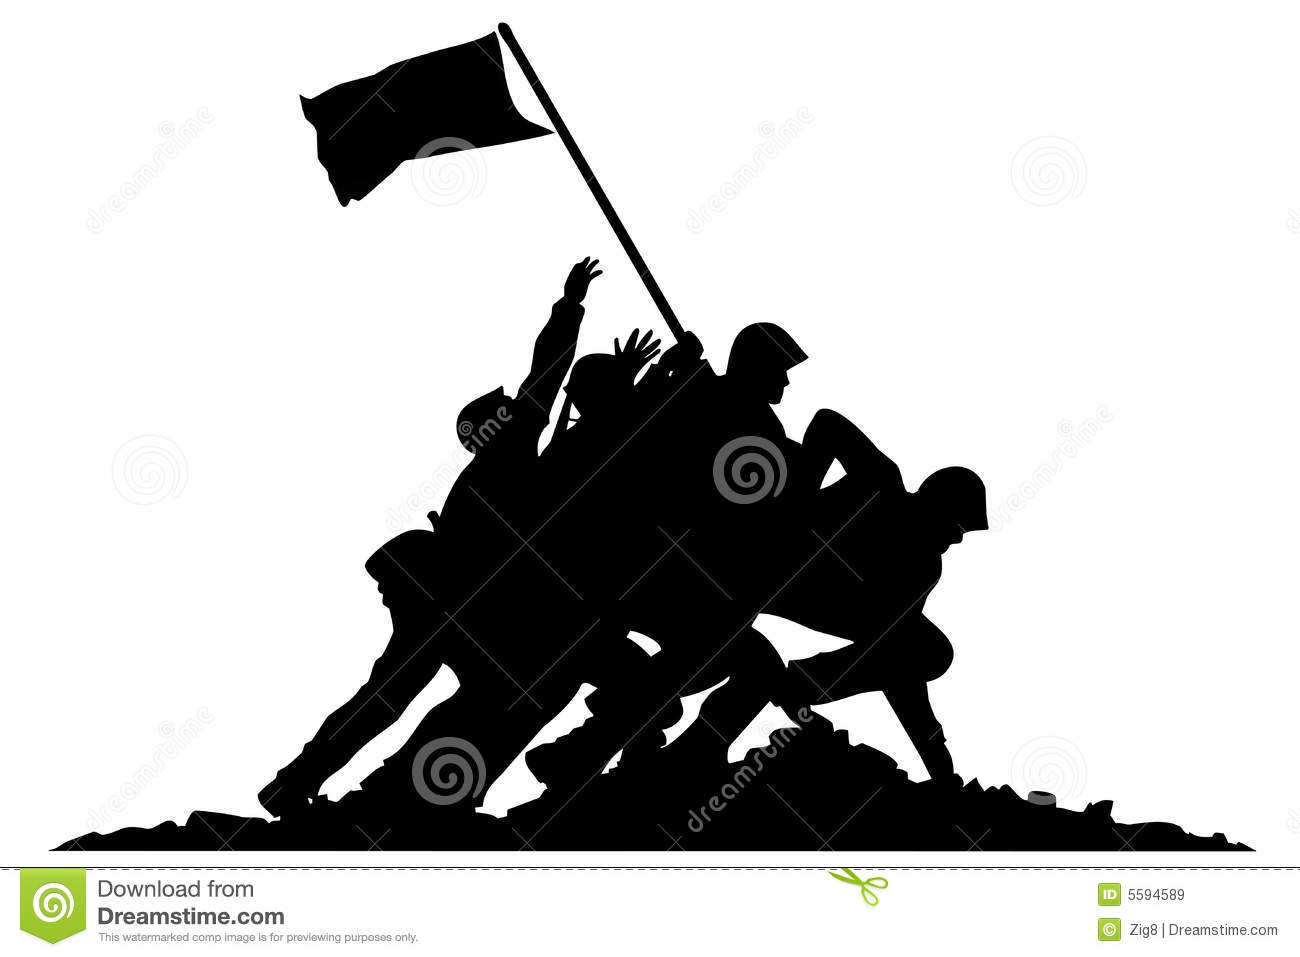 soldiers putting flag up drawing clipart - Clipground